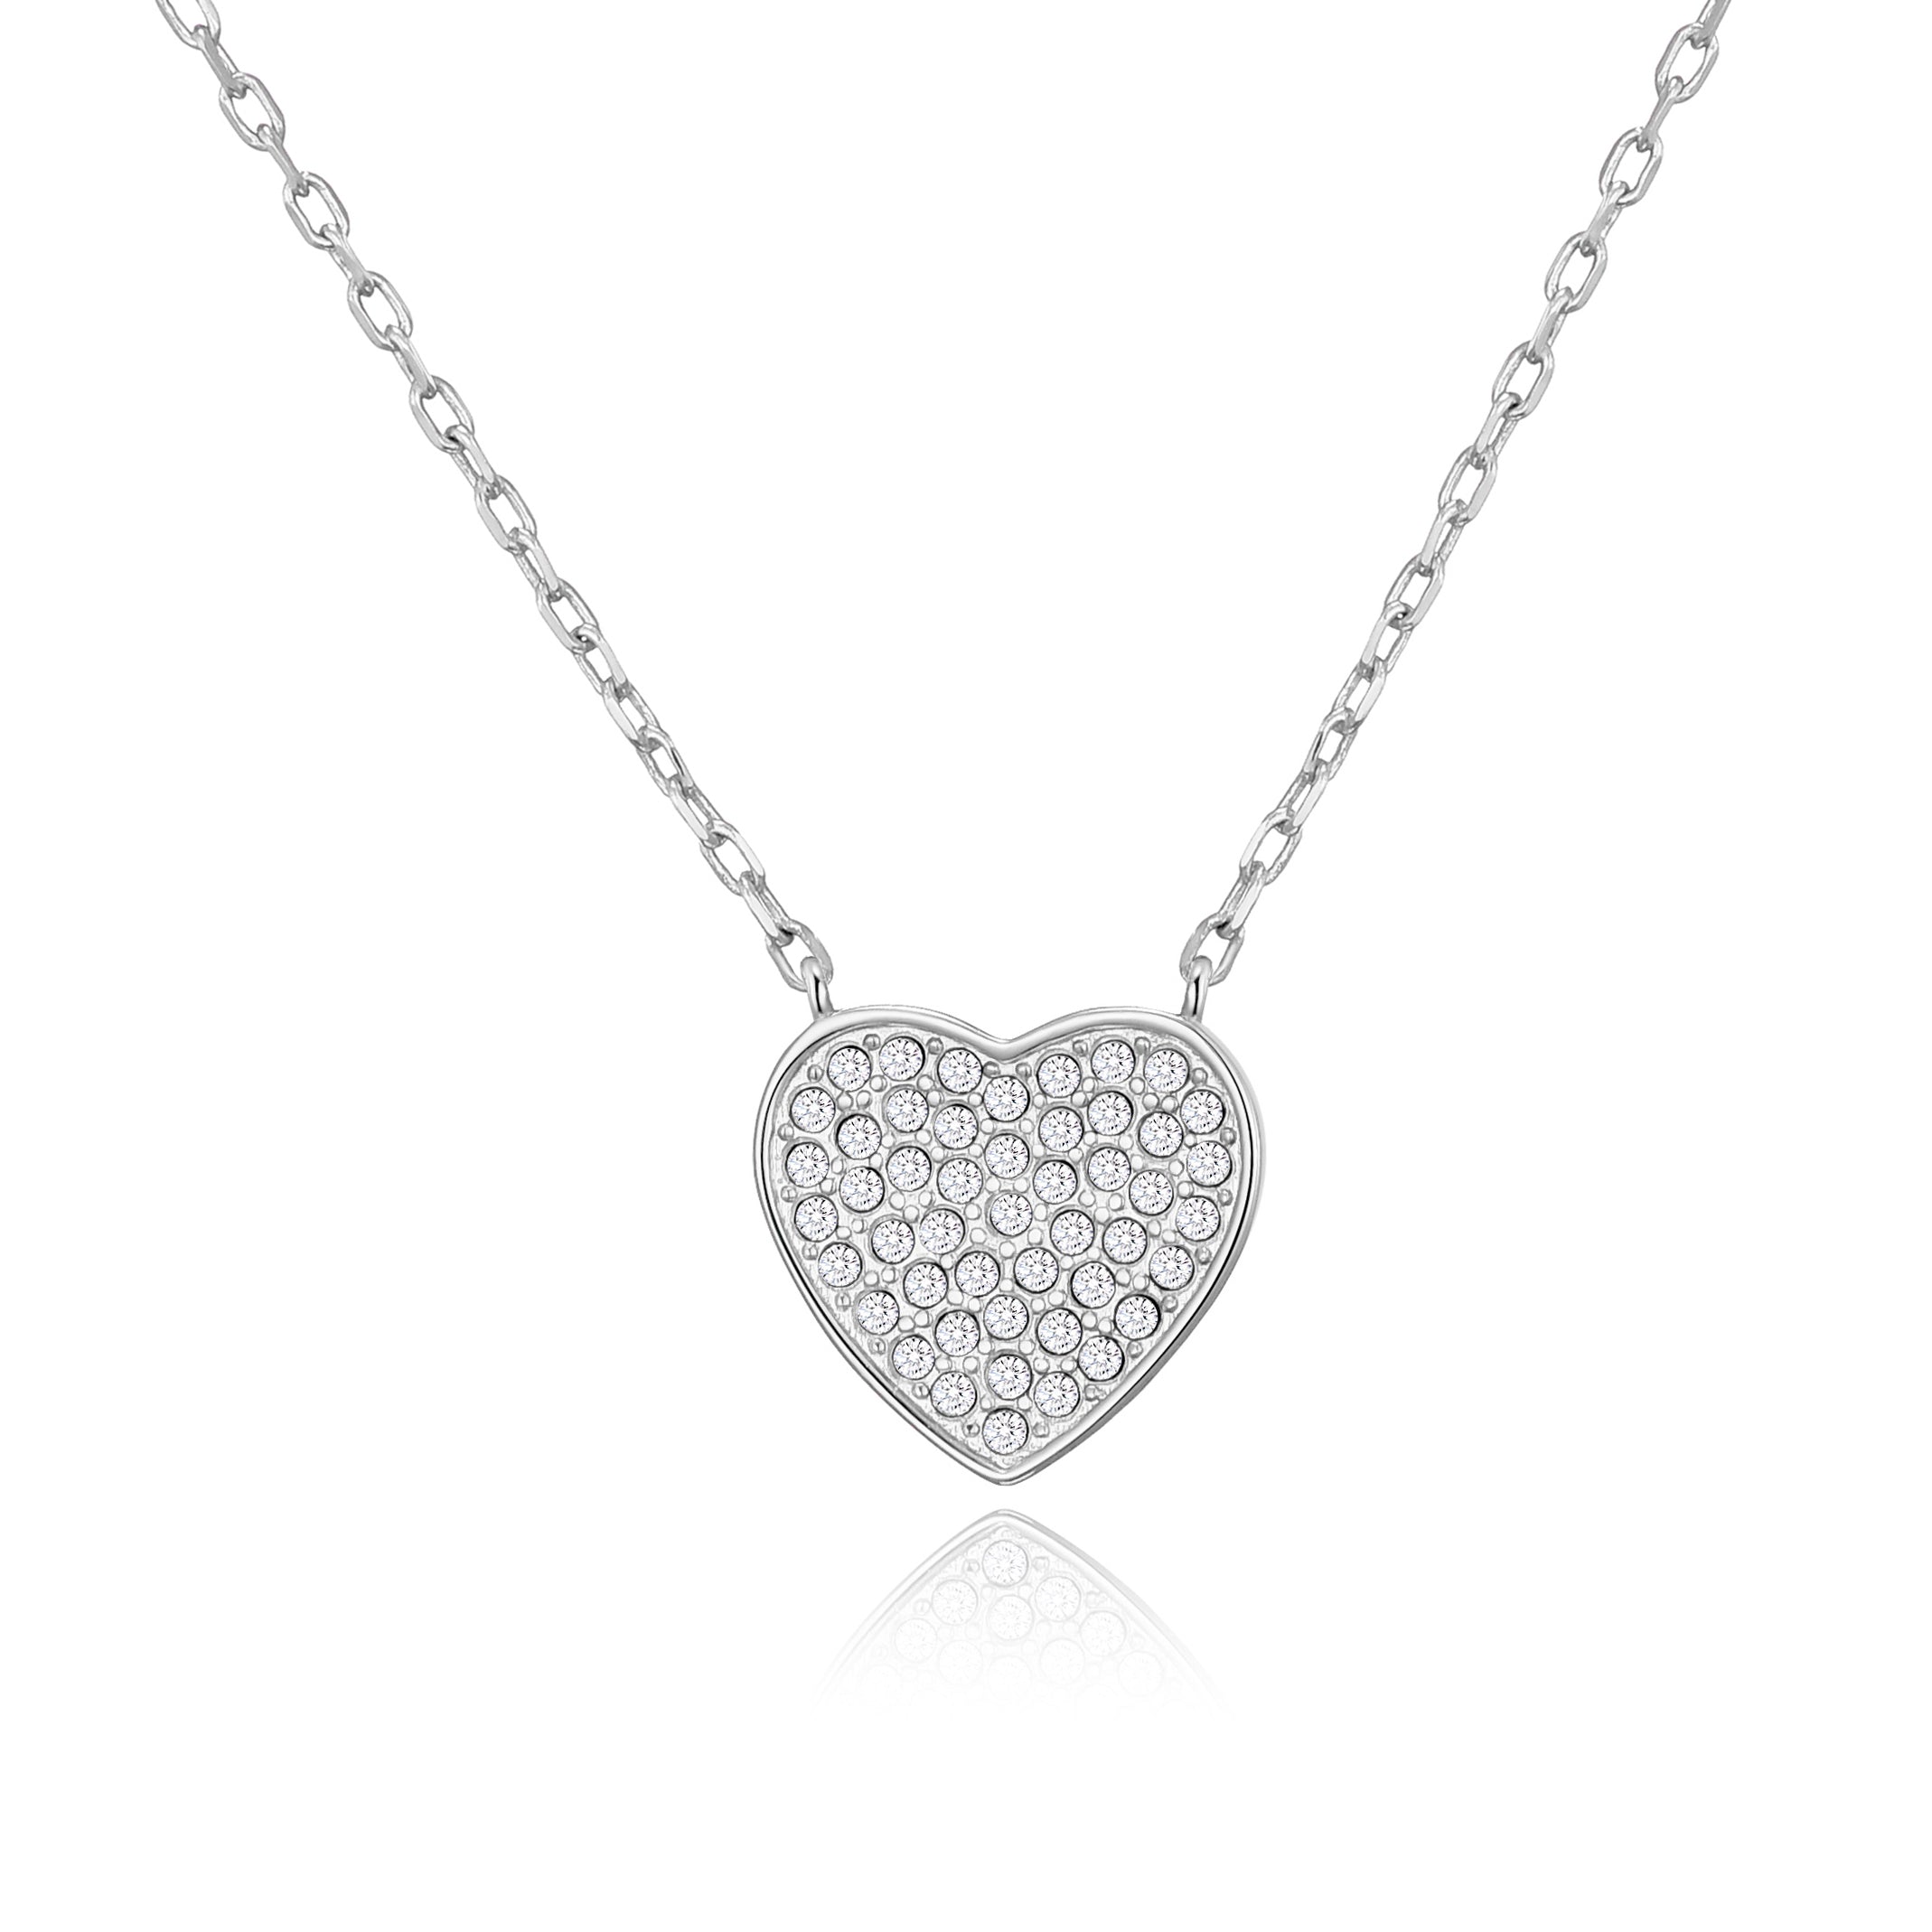 Silver Plated Pave Heart Necklace Created with Zircondia® Crystals by Philip Jones Jewellery